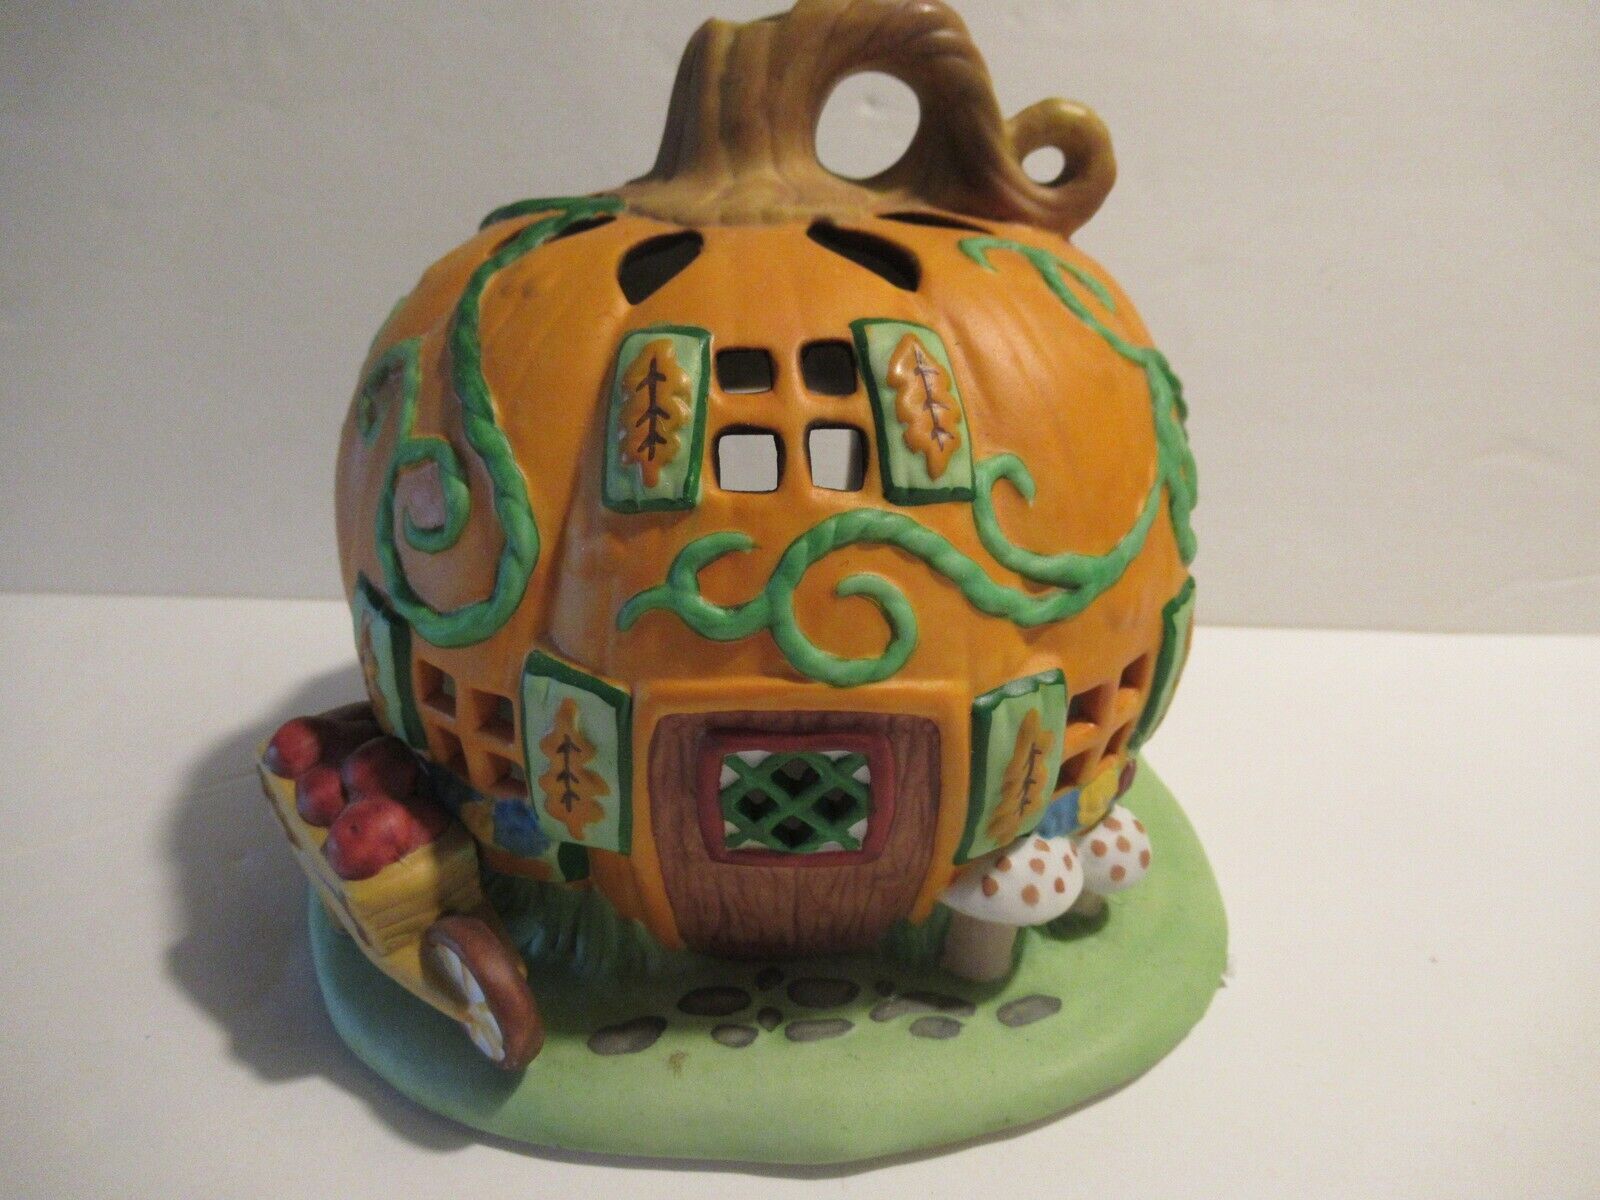 PARTYLITE Pumpkin Patch Tealight House P7303 with Box LOW PRICE